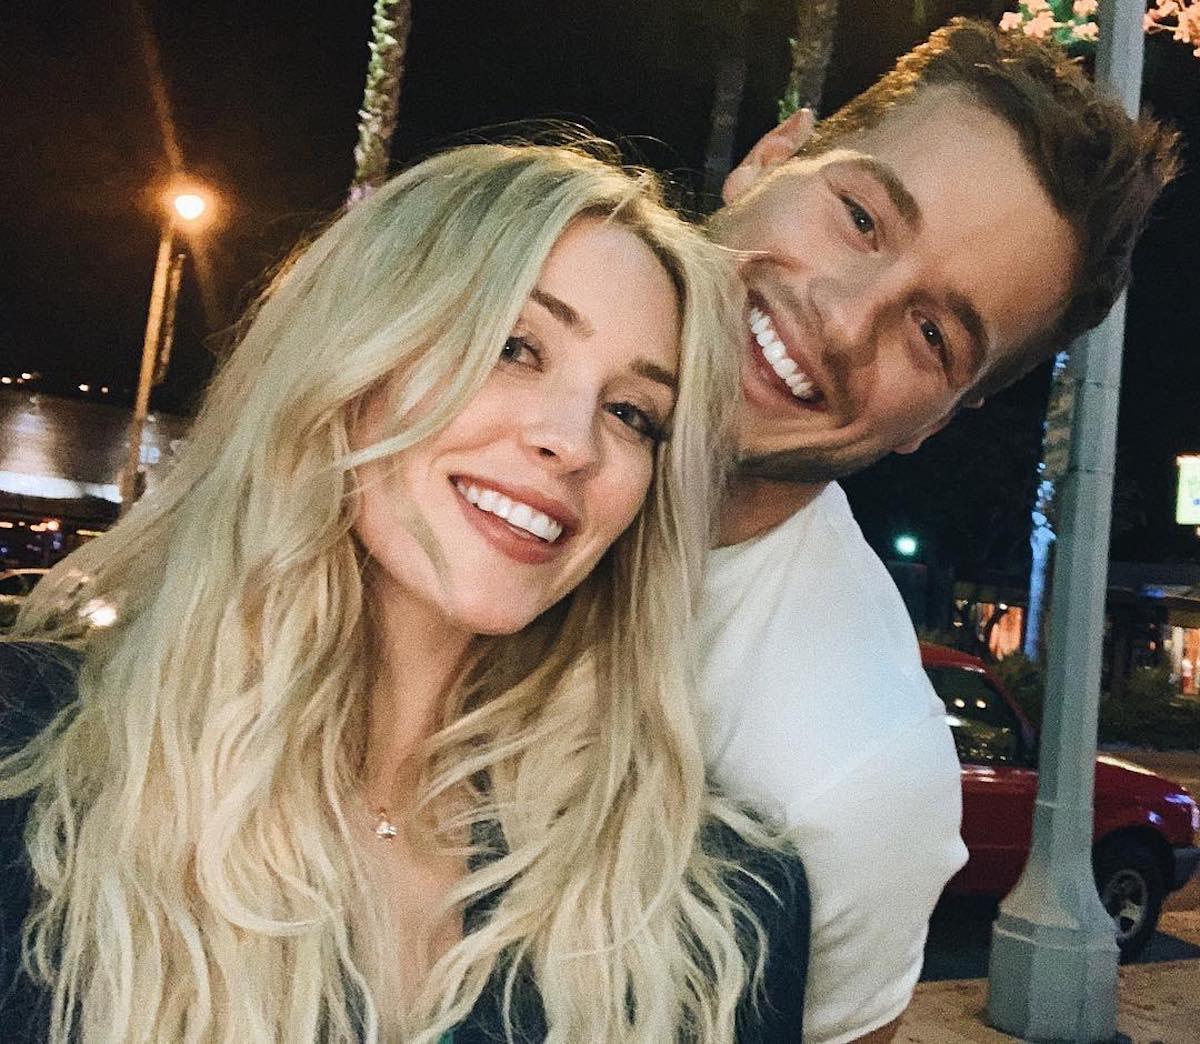 What Happened to Cassie and Colton After 'The 'Bachelor'? — Update